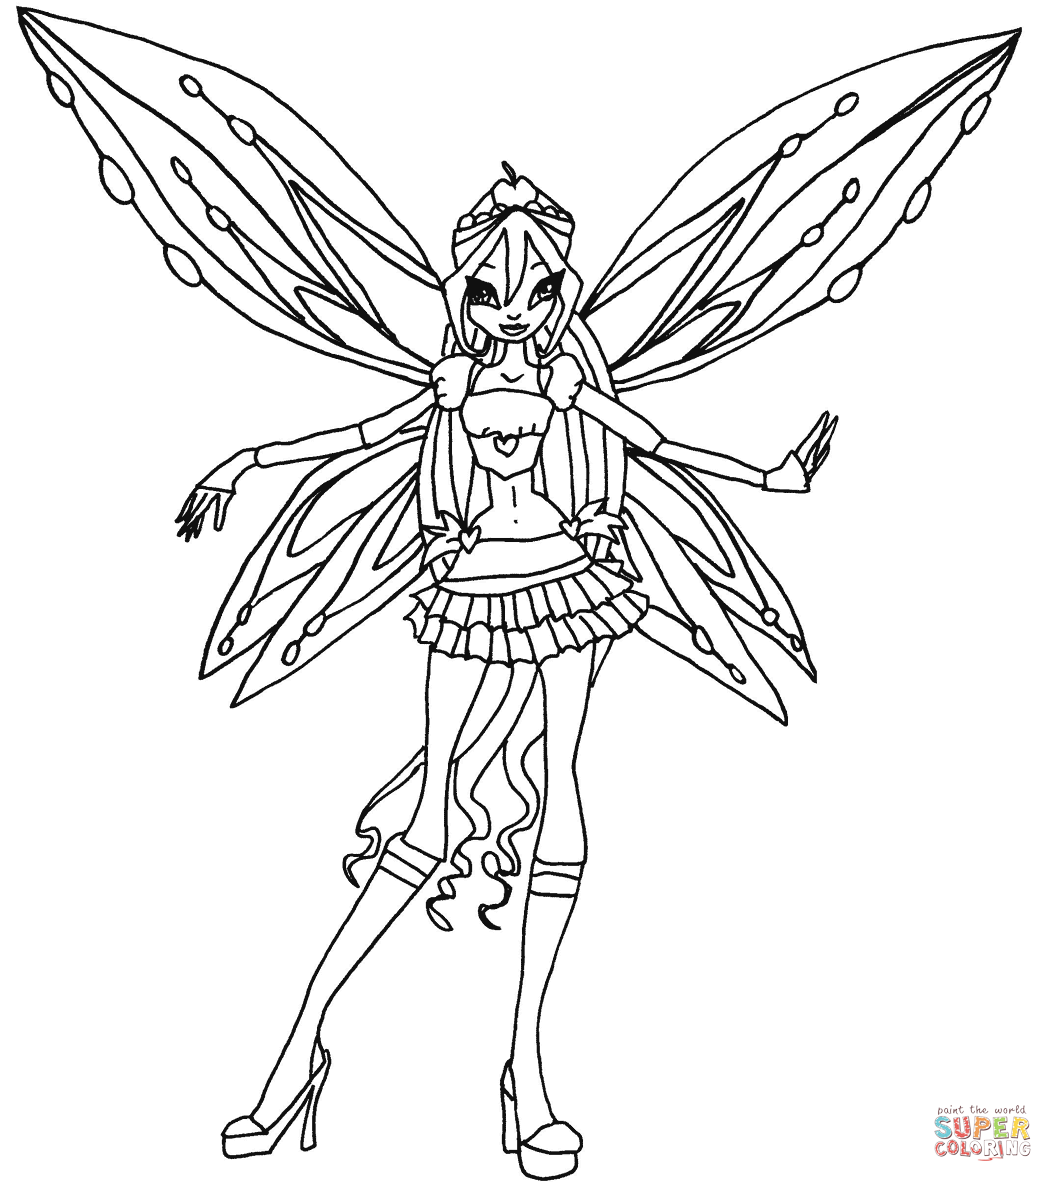 Winx Coloring Pages With Winx Club Coloring Books Coloring Pages Disney Princess Draw